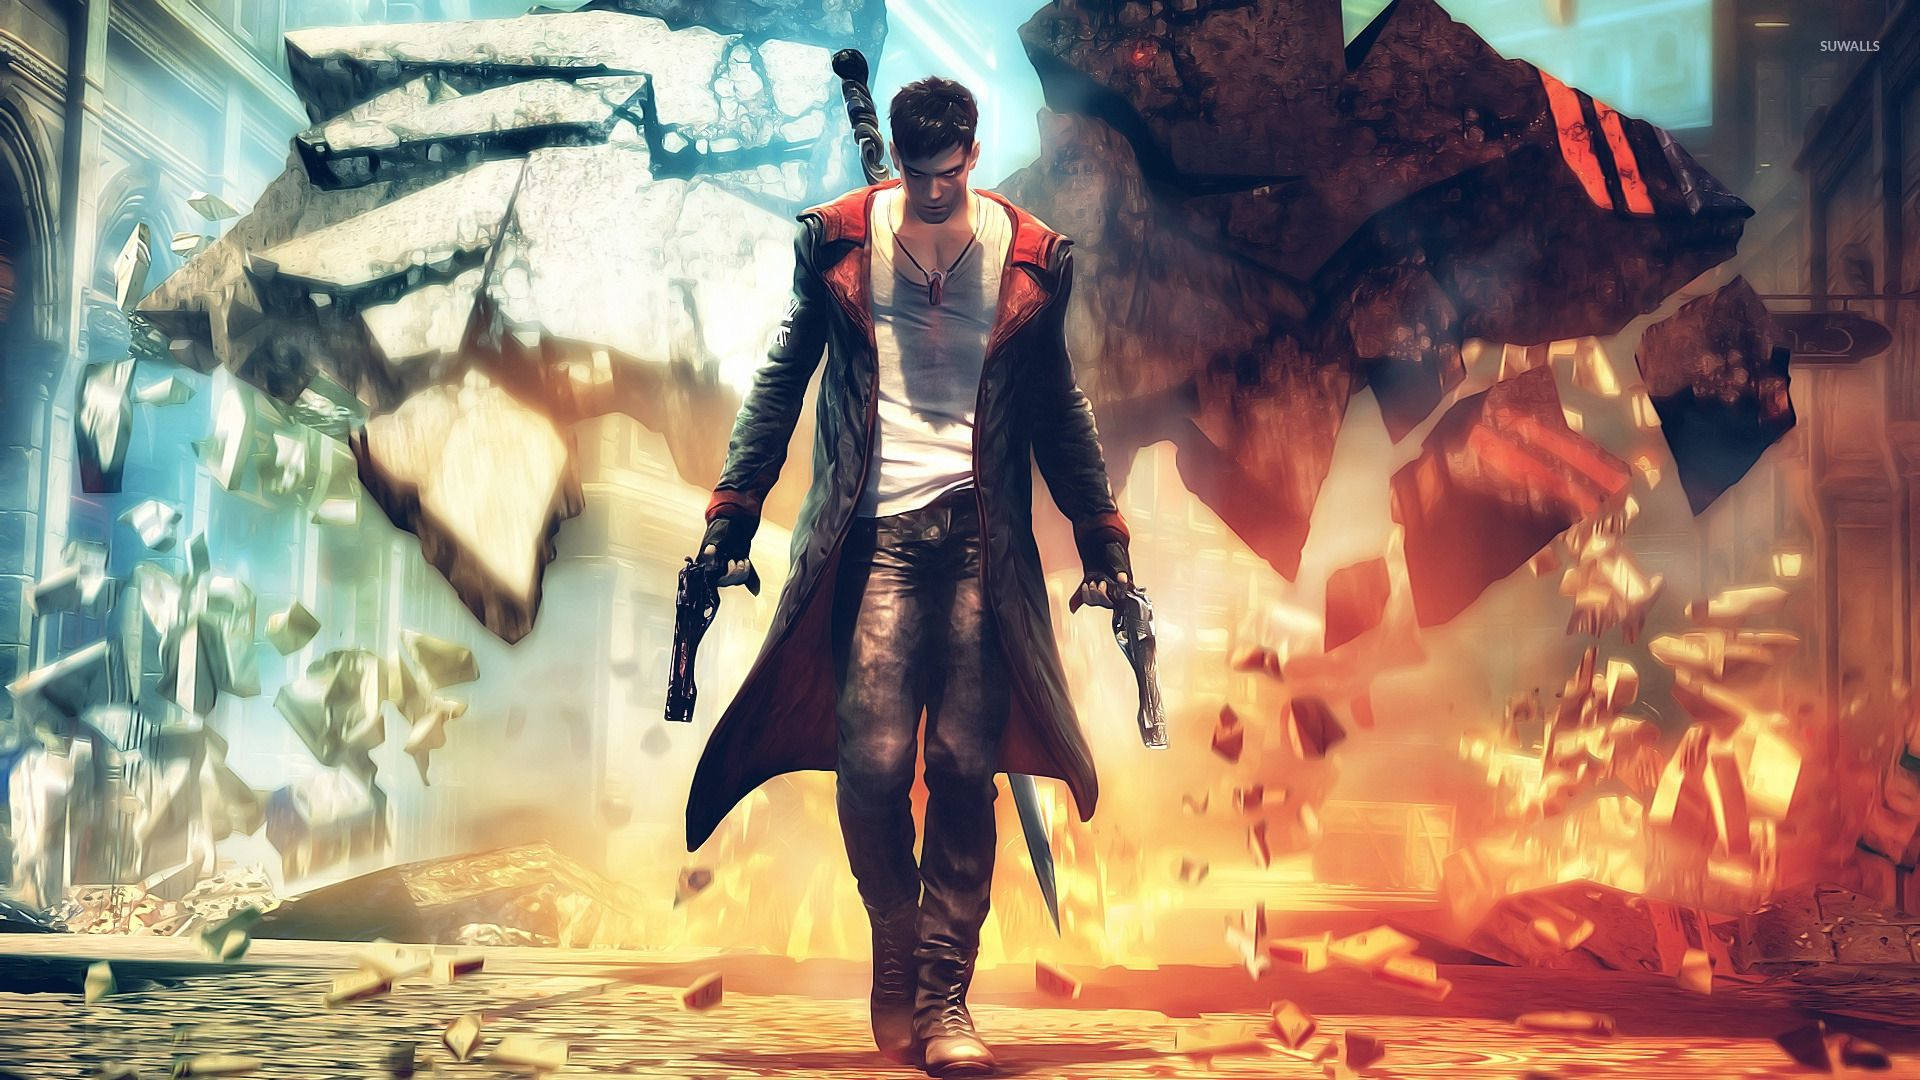 Devil May Cry 4 - Pc - Pc - Pc - Pc - Pc - Background